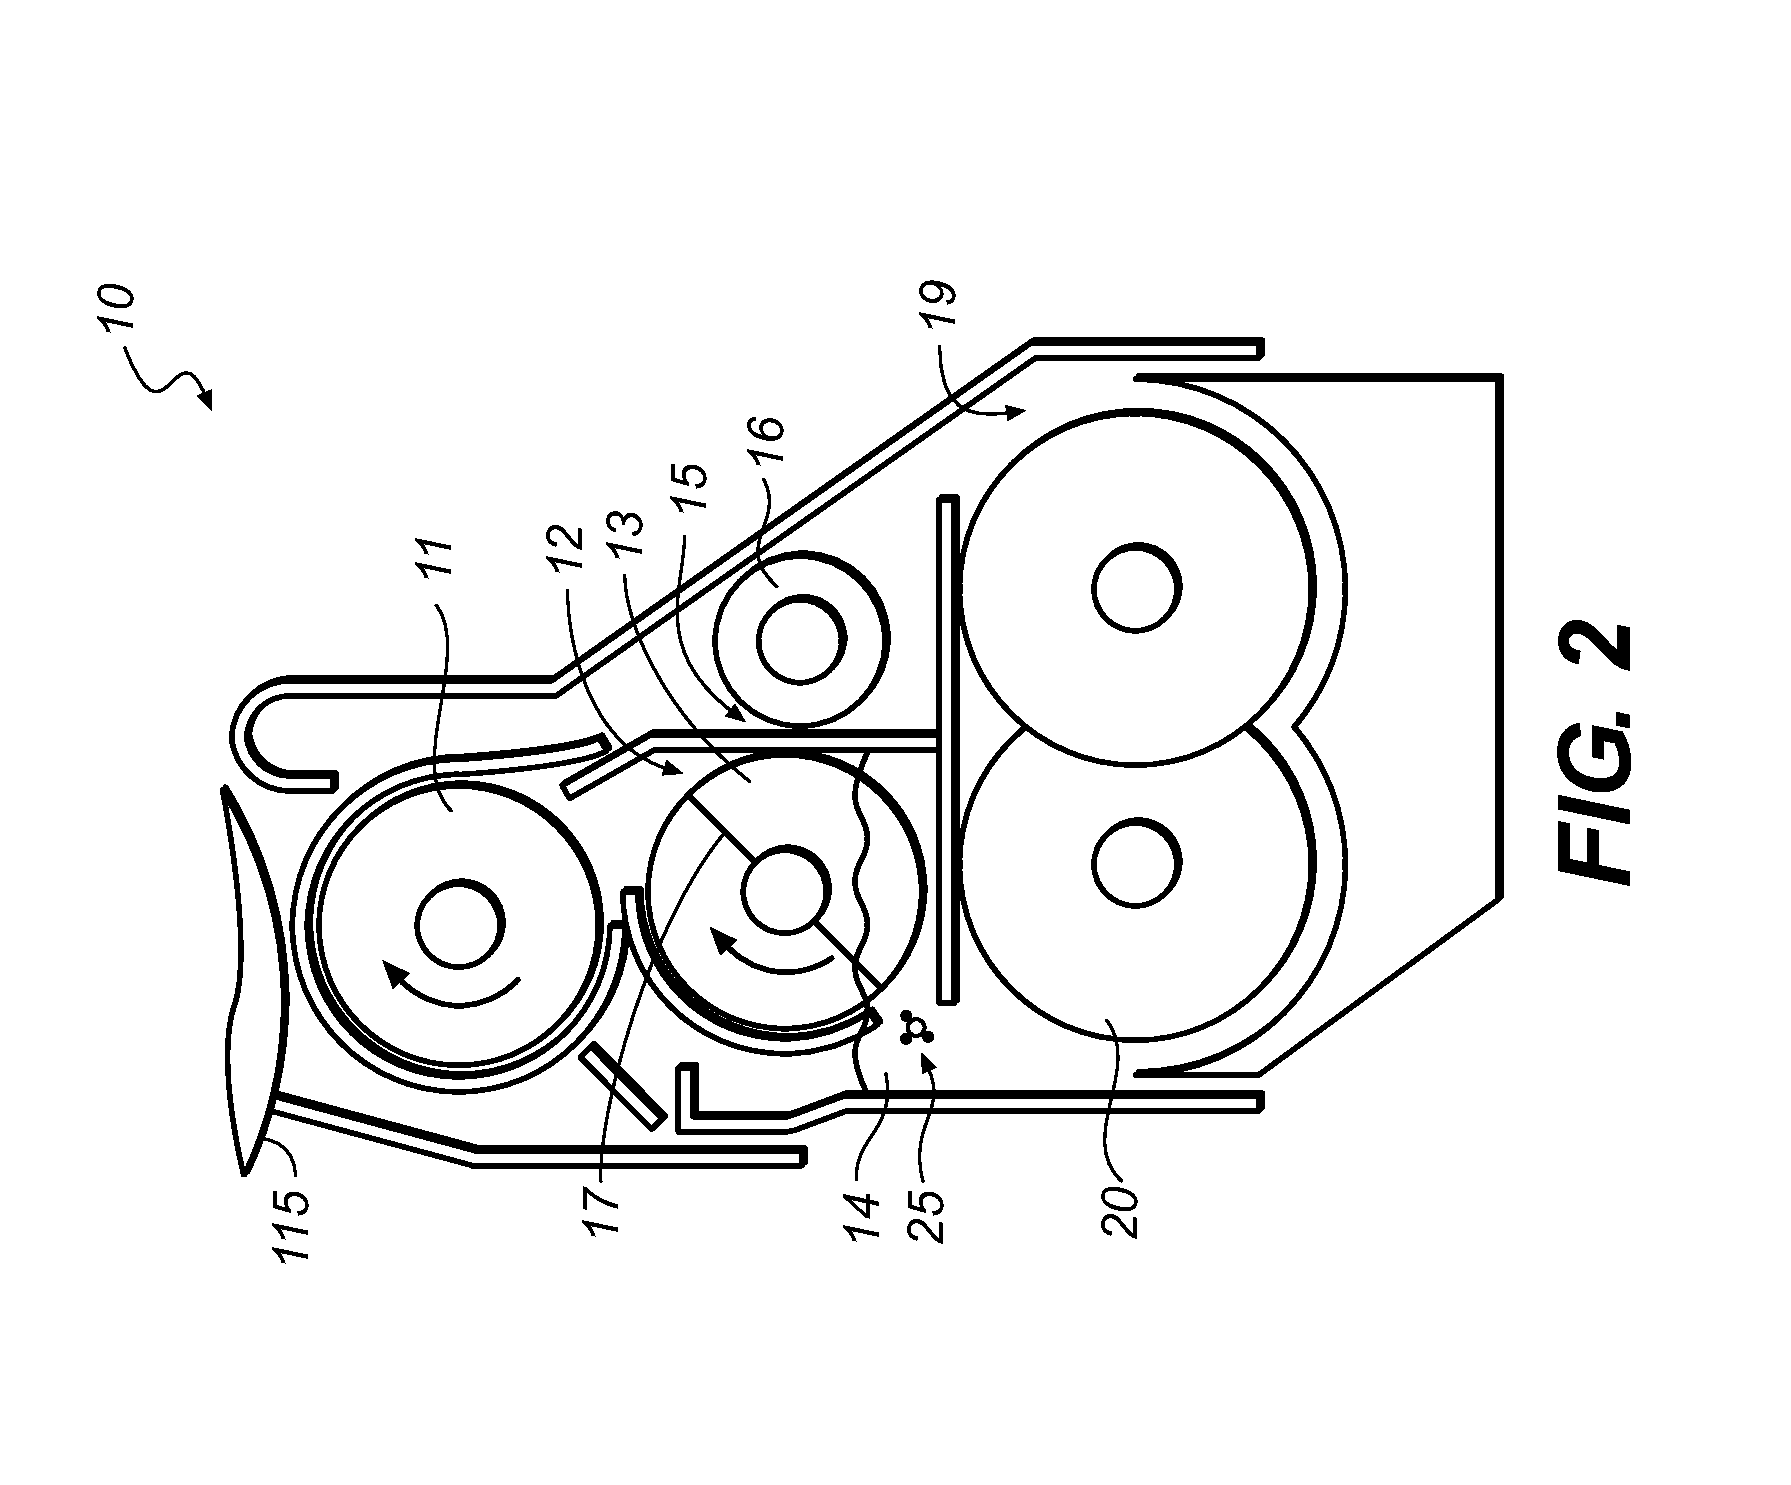 Method of using feed auger with paddles